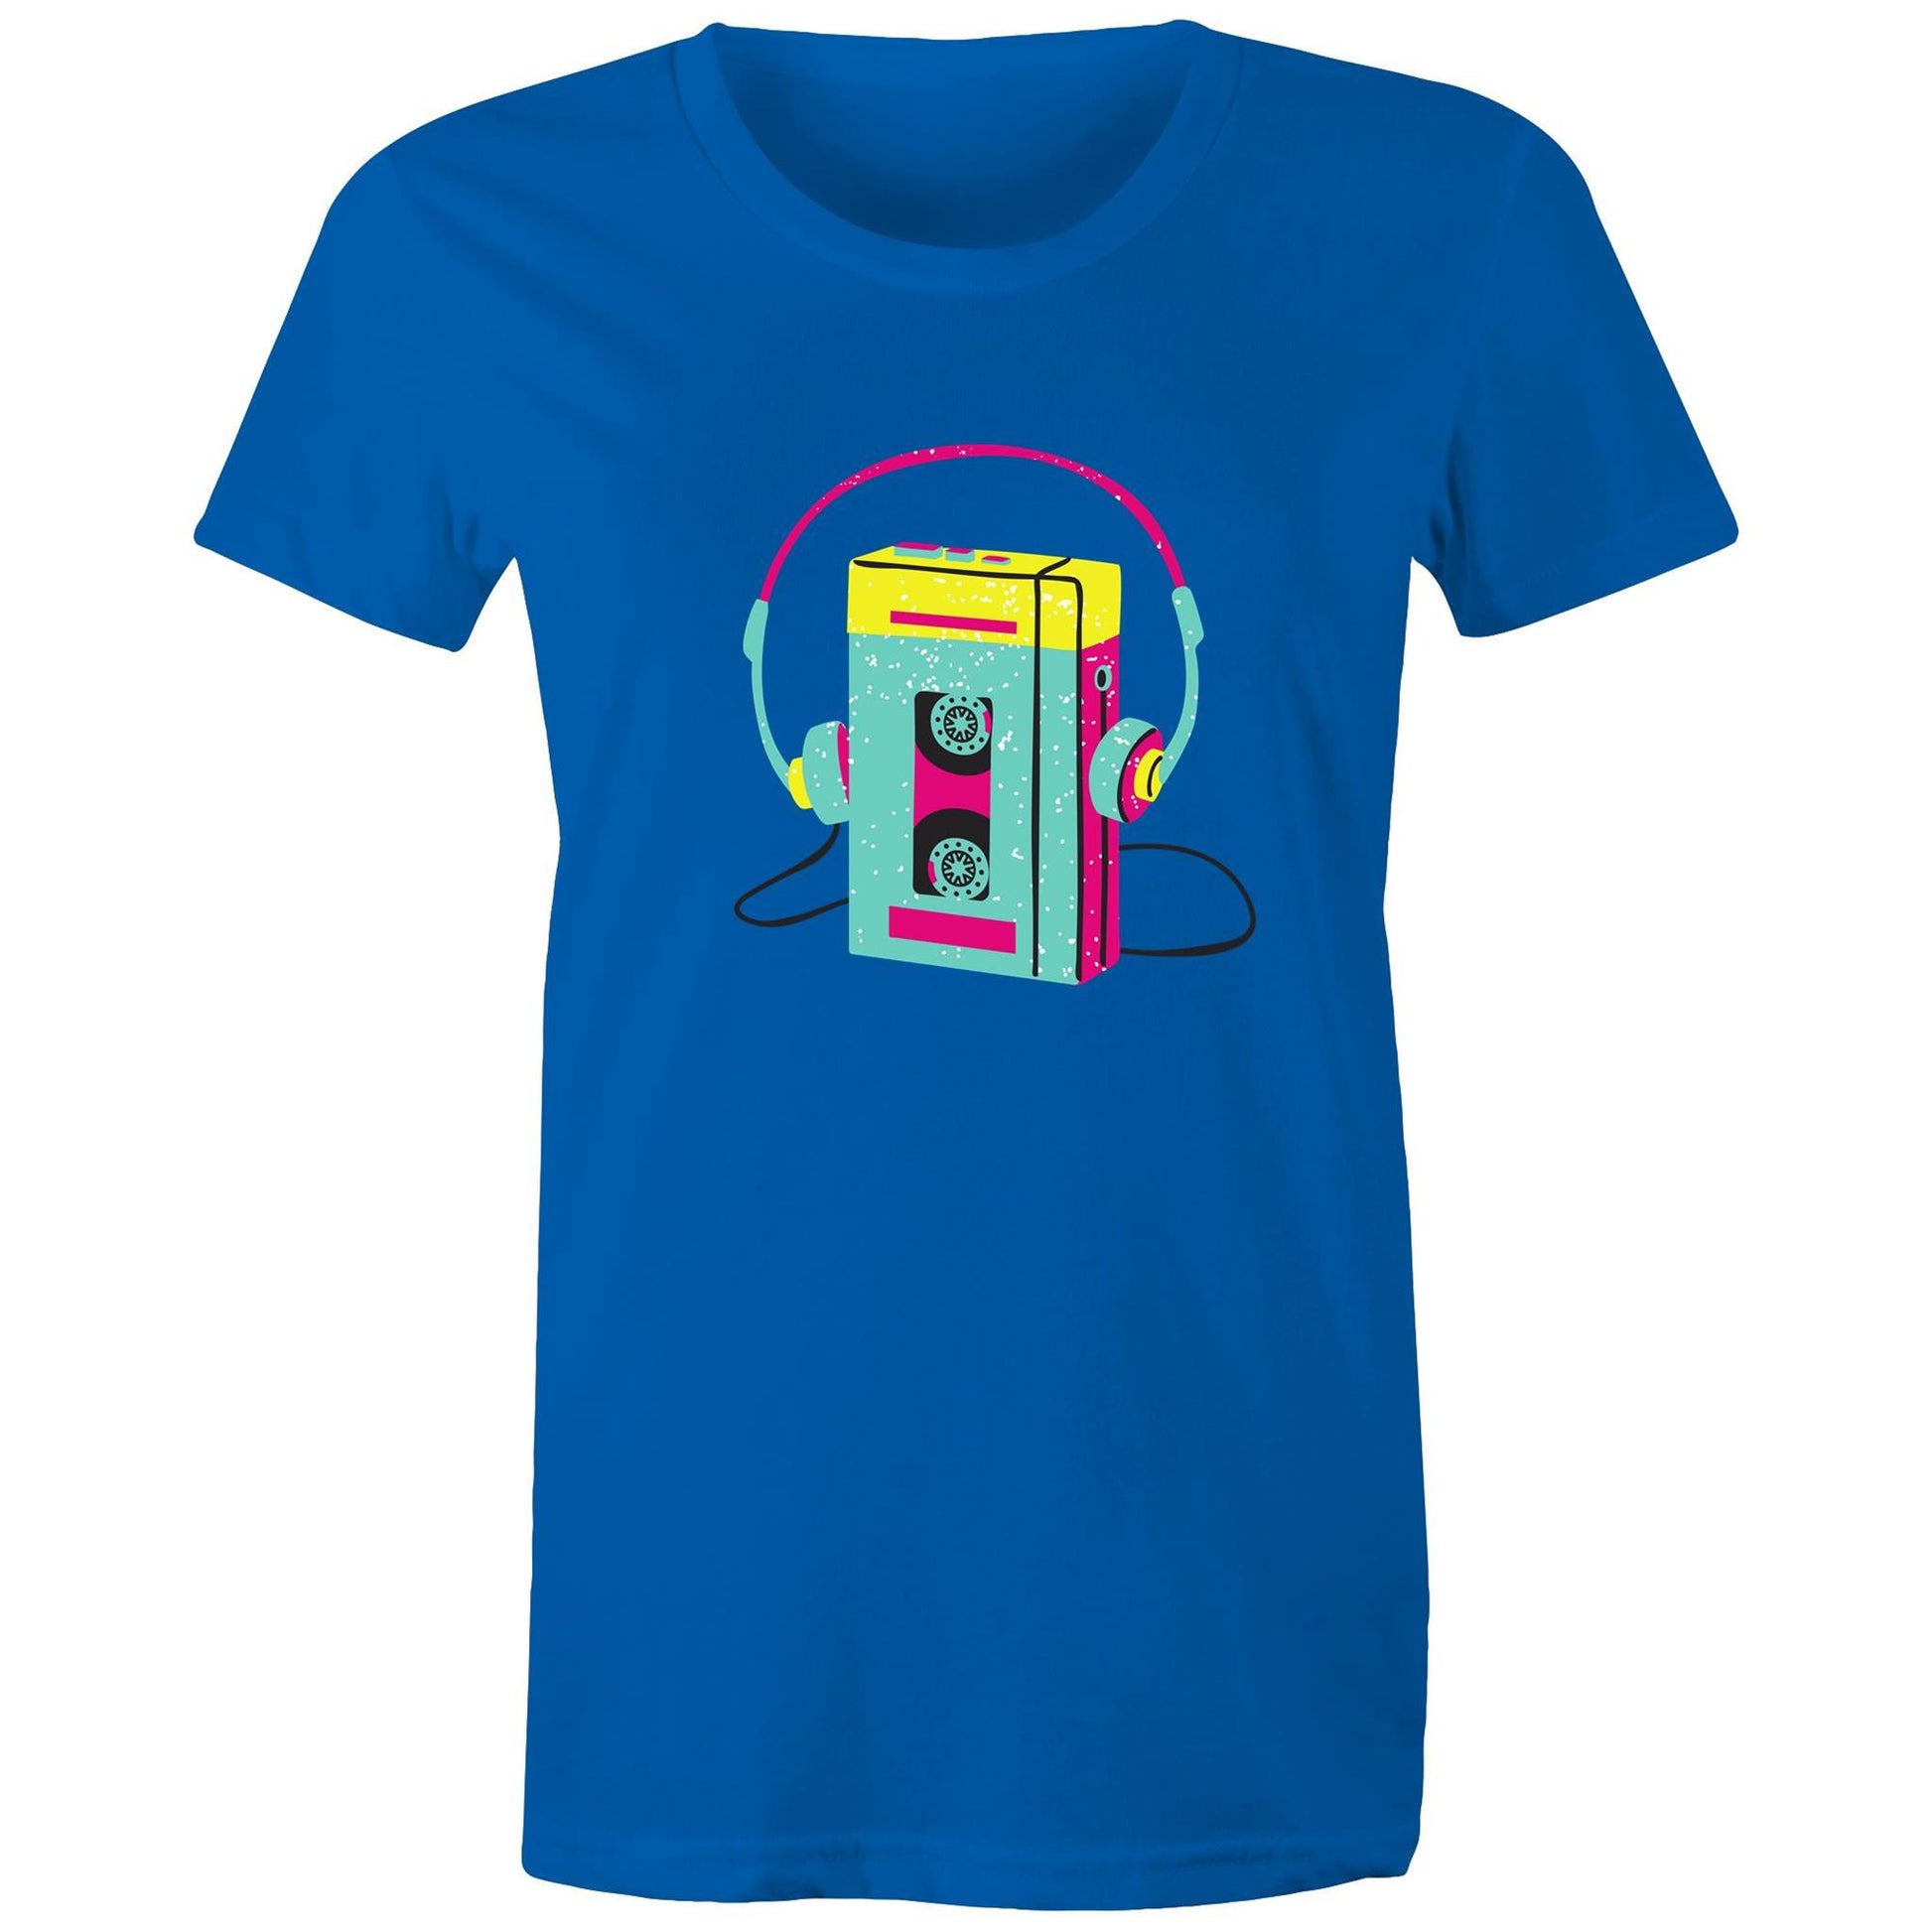 Wired For Sound, Music Player - Womens T-shirt Bright Royal Womens T-shirt Music Retro Womens